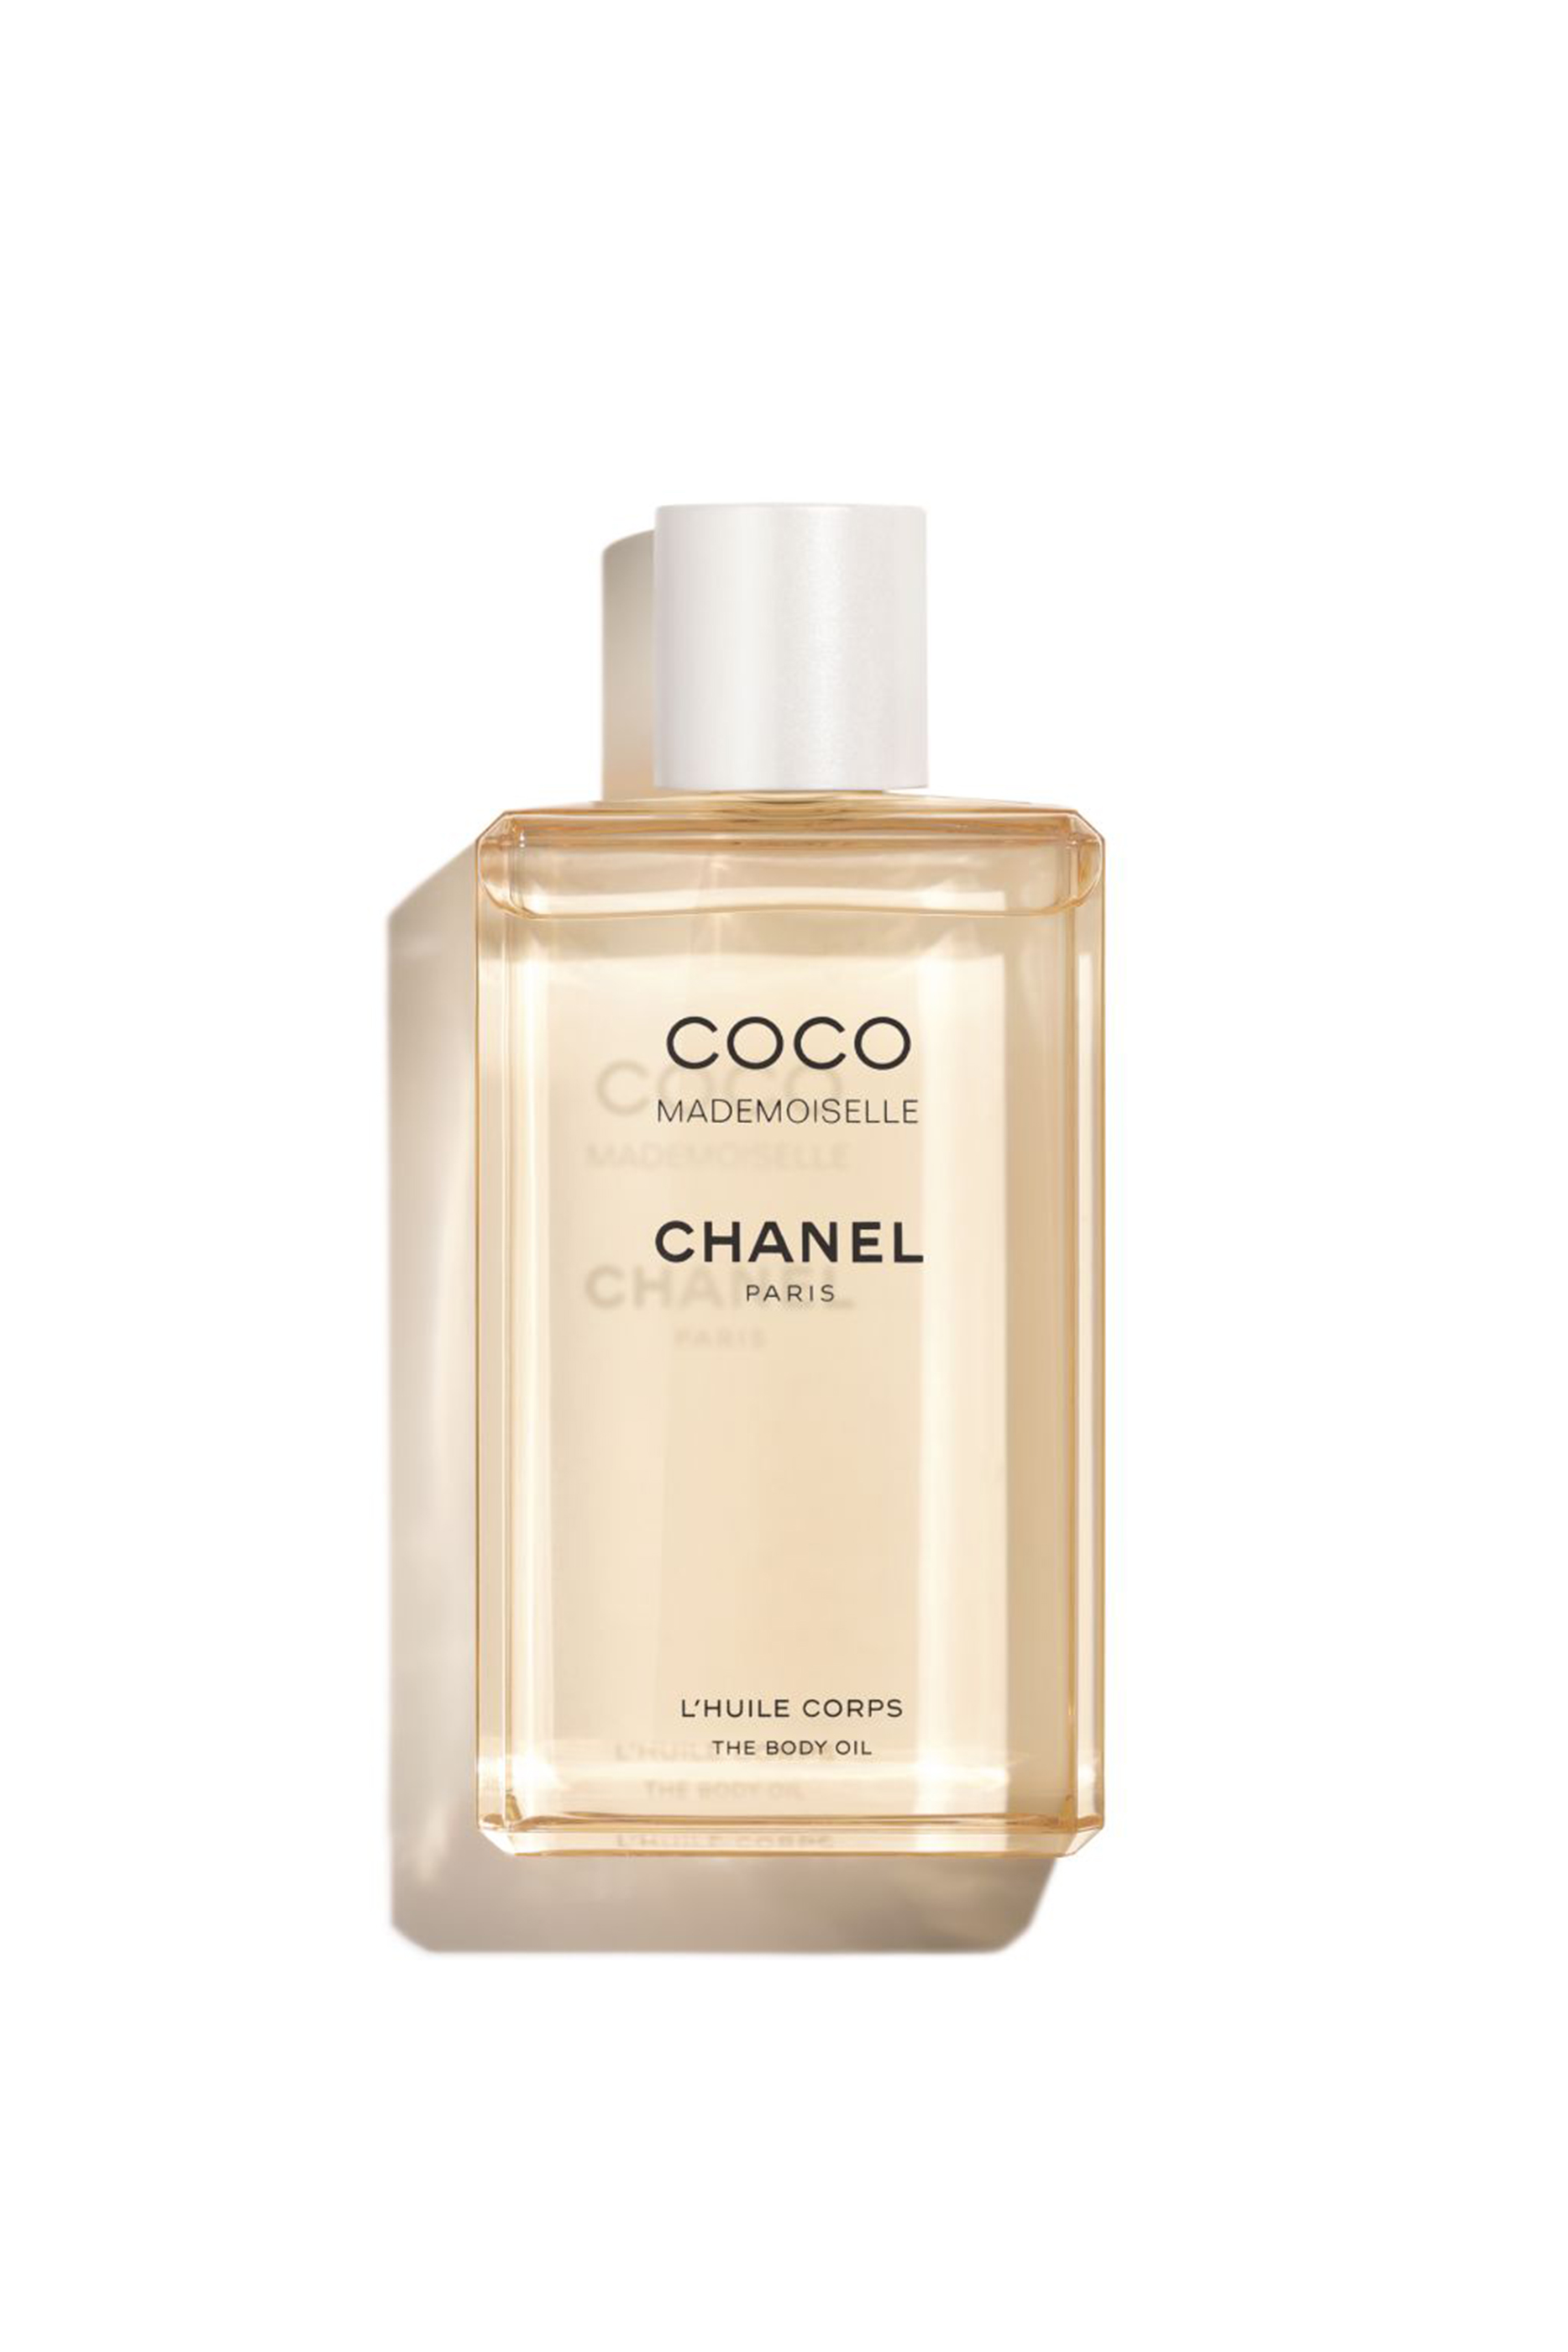 CHANEL · N° 5 The Gold Body Oil & Coco Mademoiselle Pearly Body Gel,  Holiday 2022